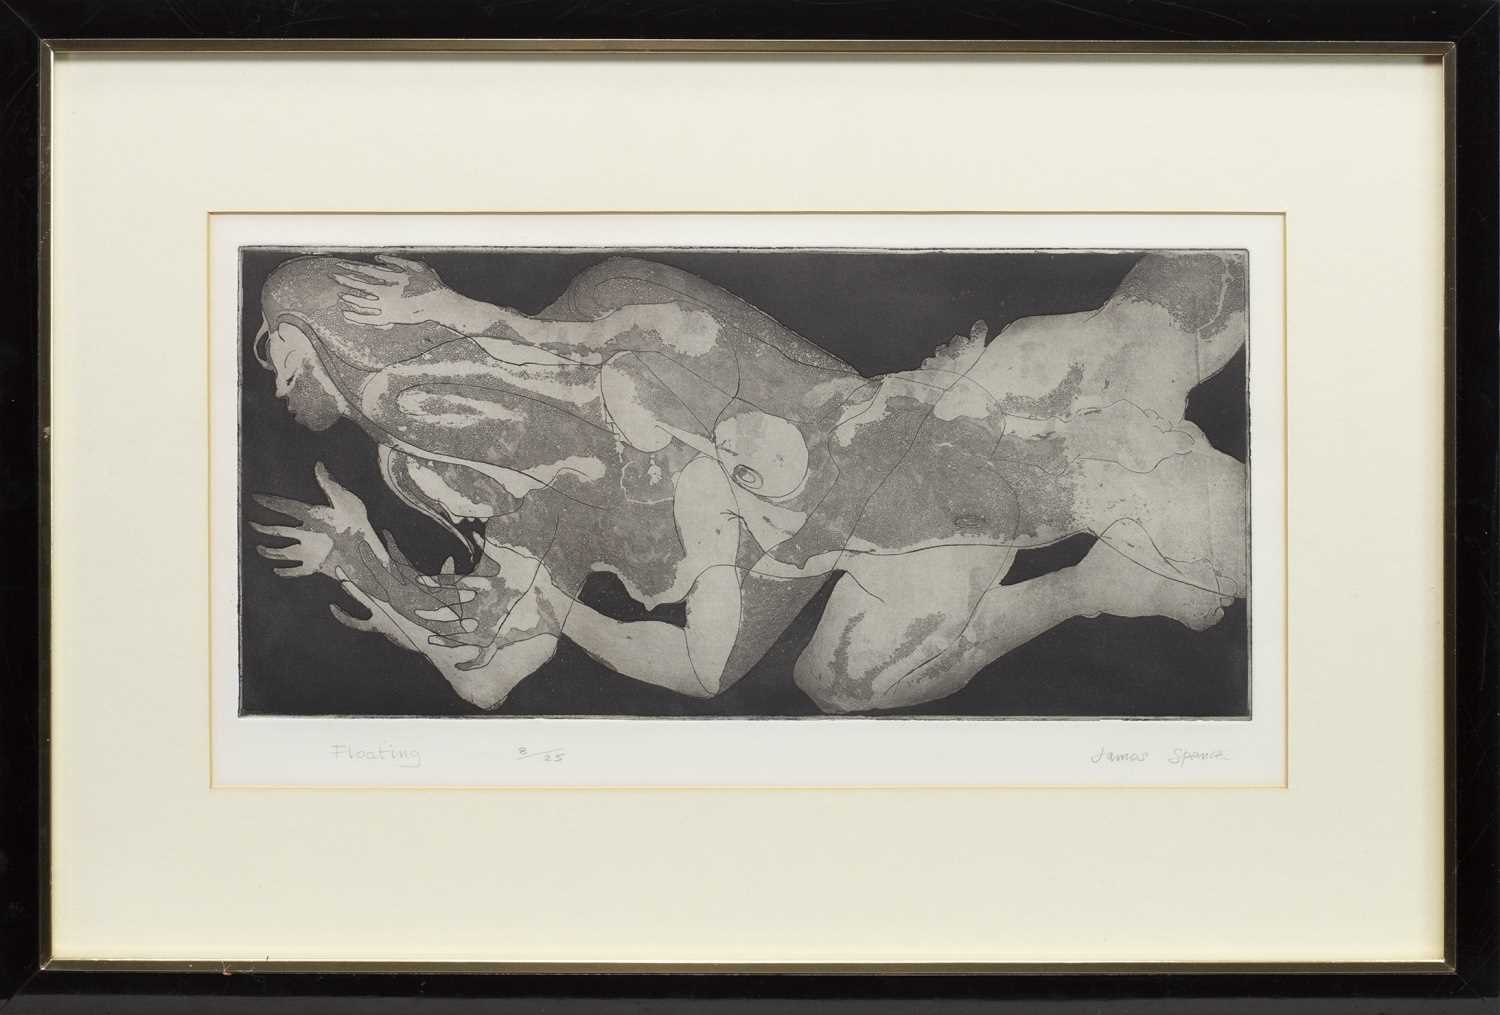 Lot 407 - FLOATING, AN ETCHING BY JAMES SPENCE